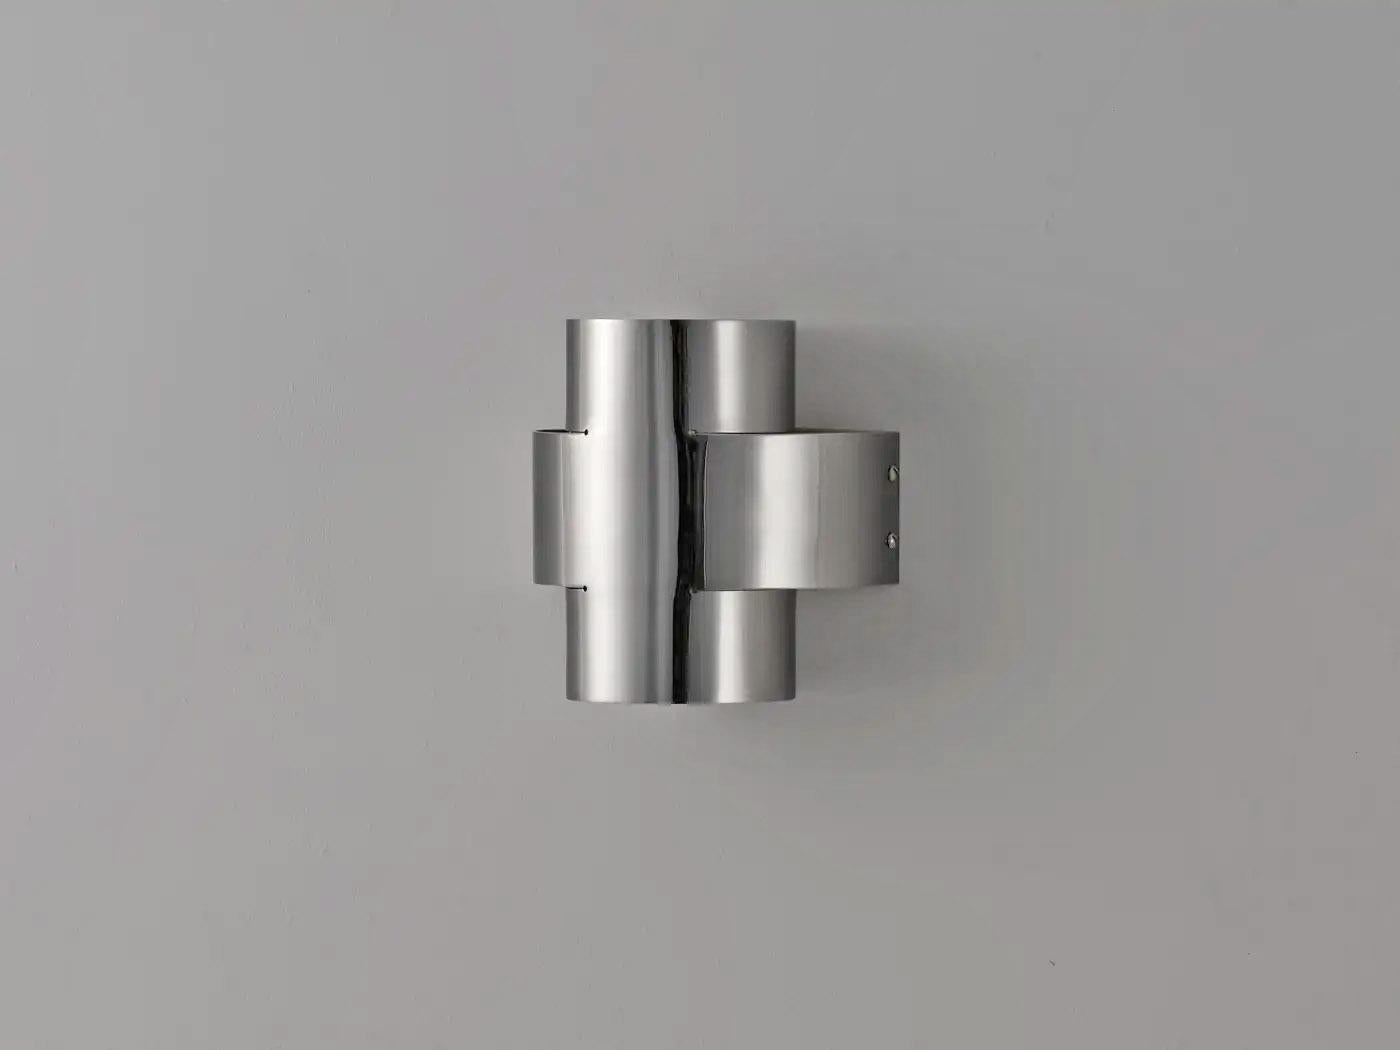 Contemporary Aged Brass Wall Sconce, Plus One Large Lamp by Paul Matter

PLUS Series is a new range of appliqués by Paul Matter that feature a simple shape in singular and repetitive arrangements. A 3-Dimensional plus is formed out of a single tube